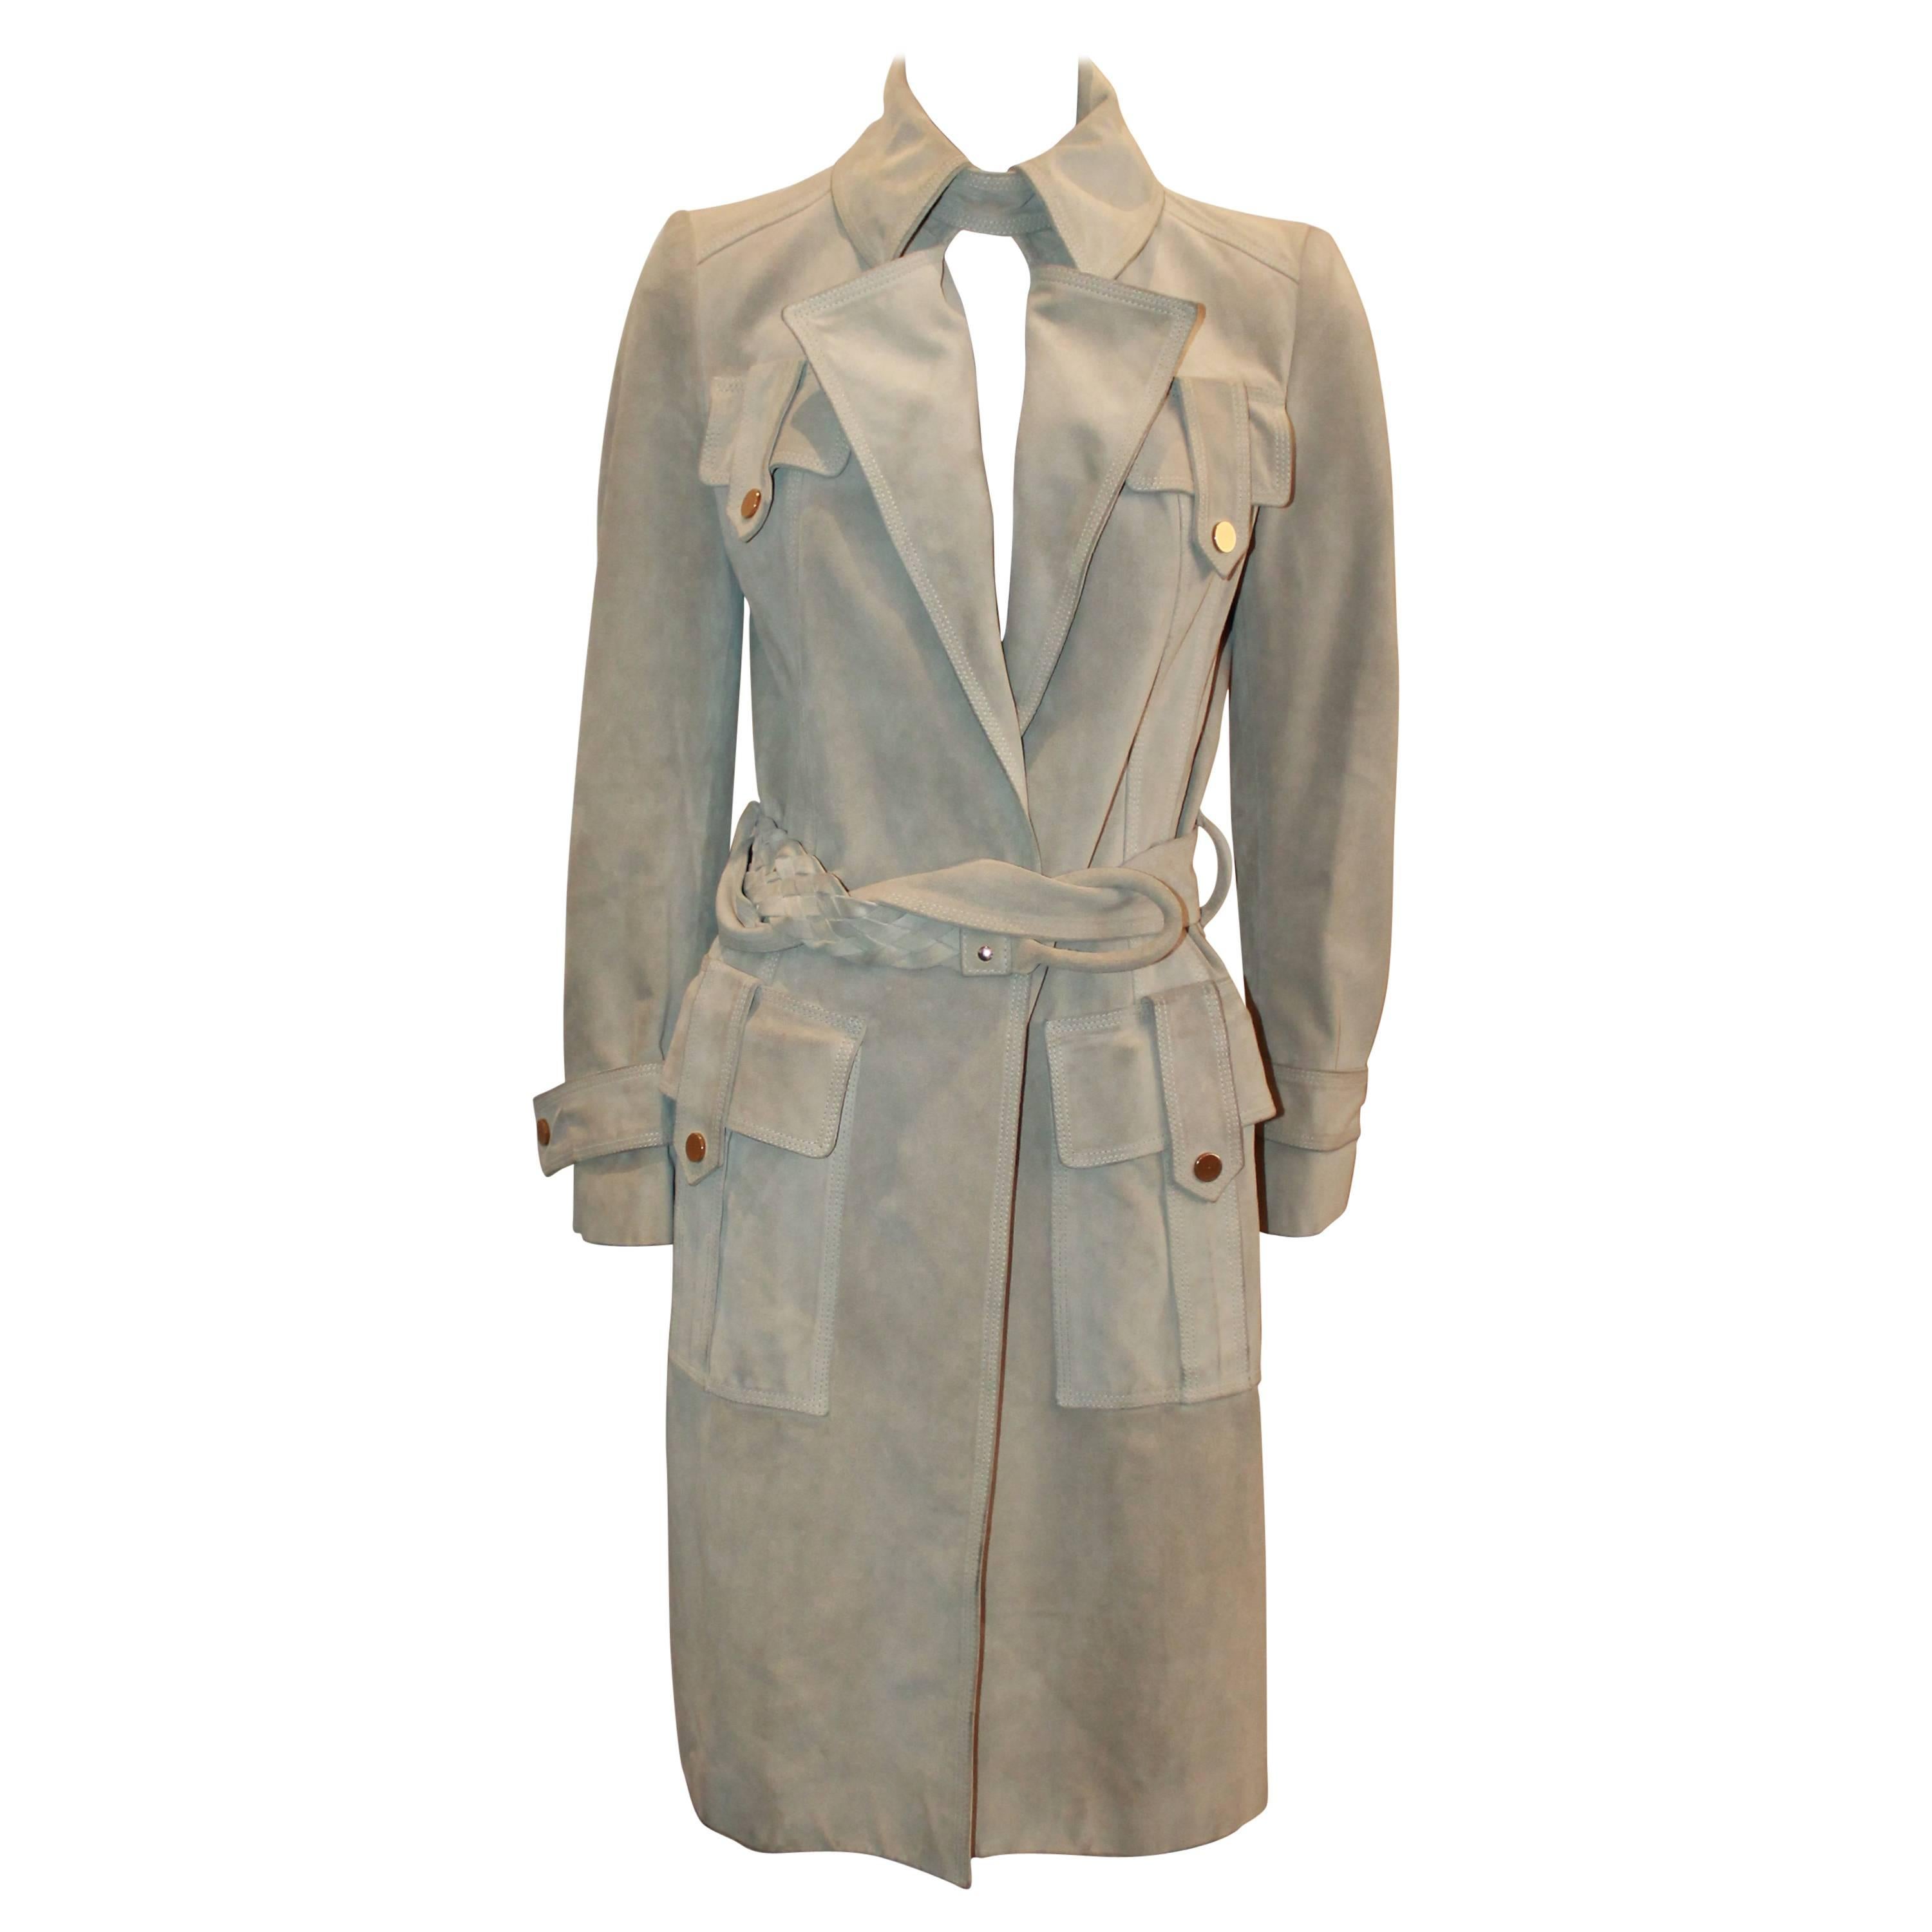 Gucci Beige Suede Trench Coat with Braided Belt - S